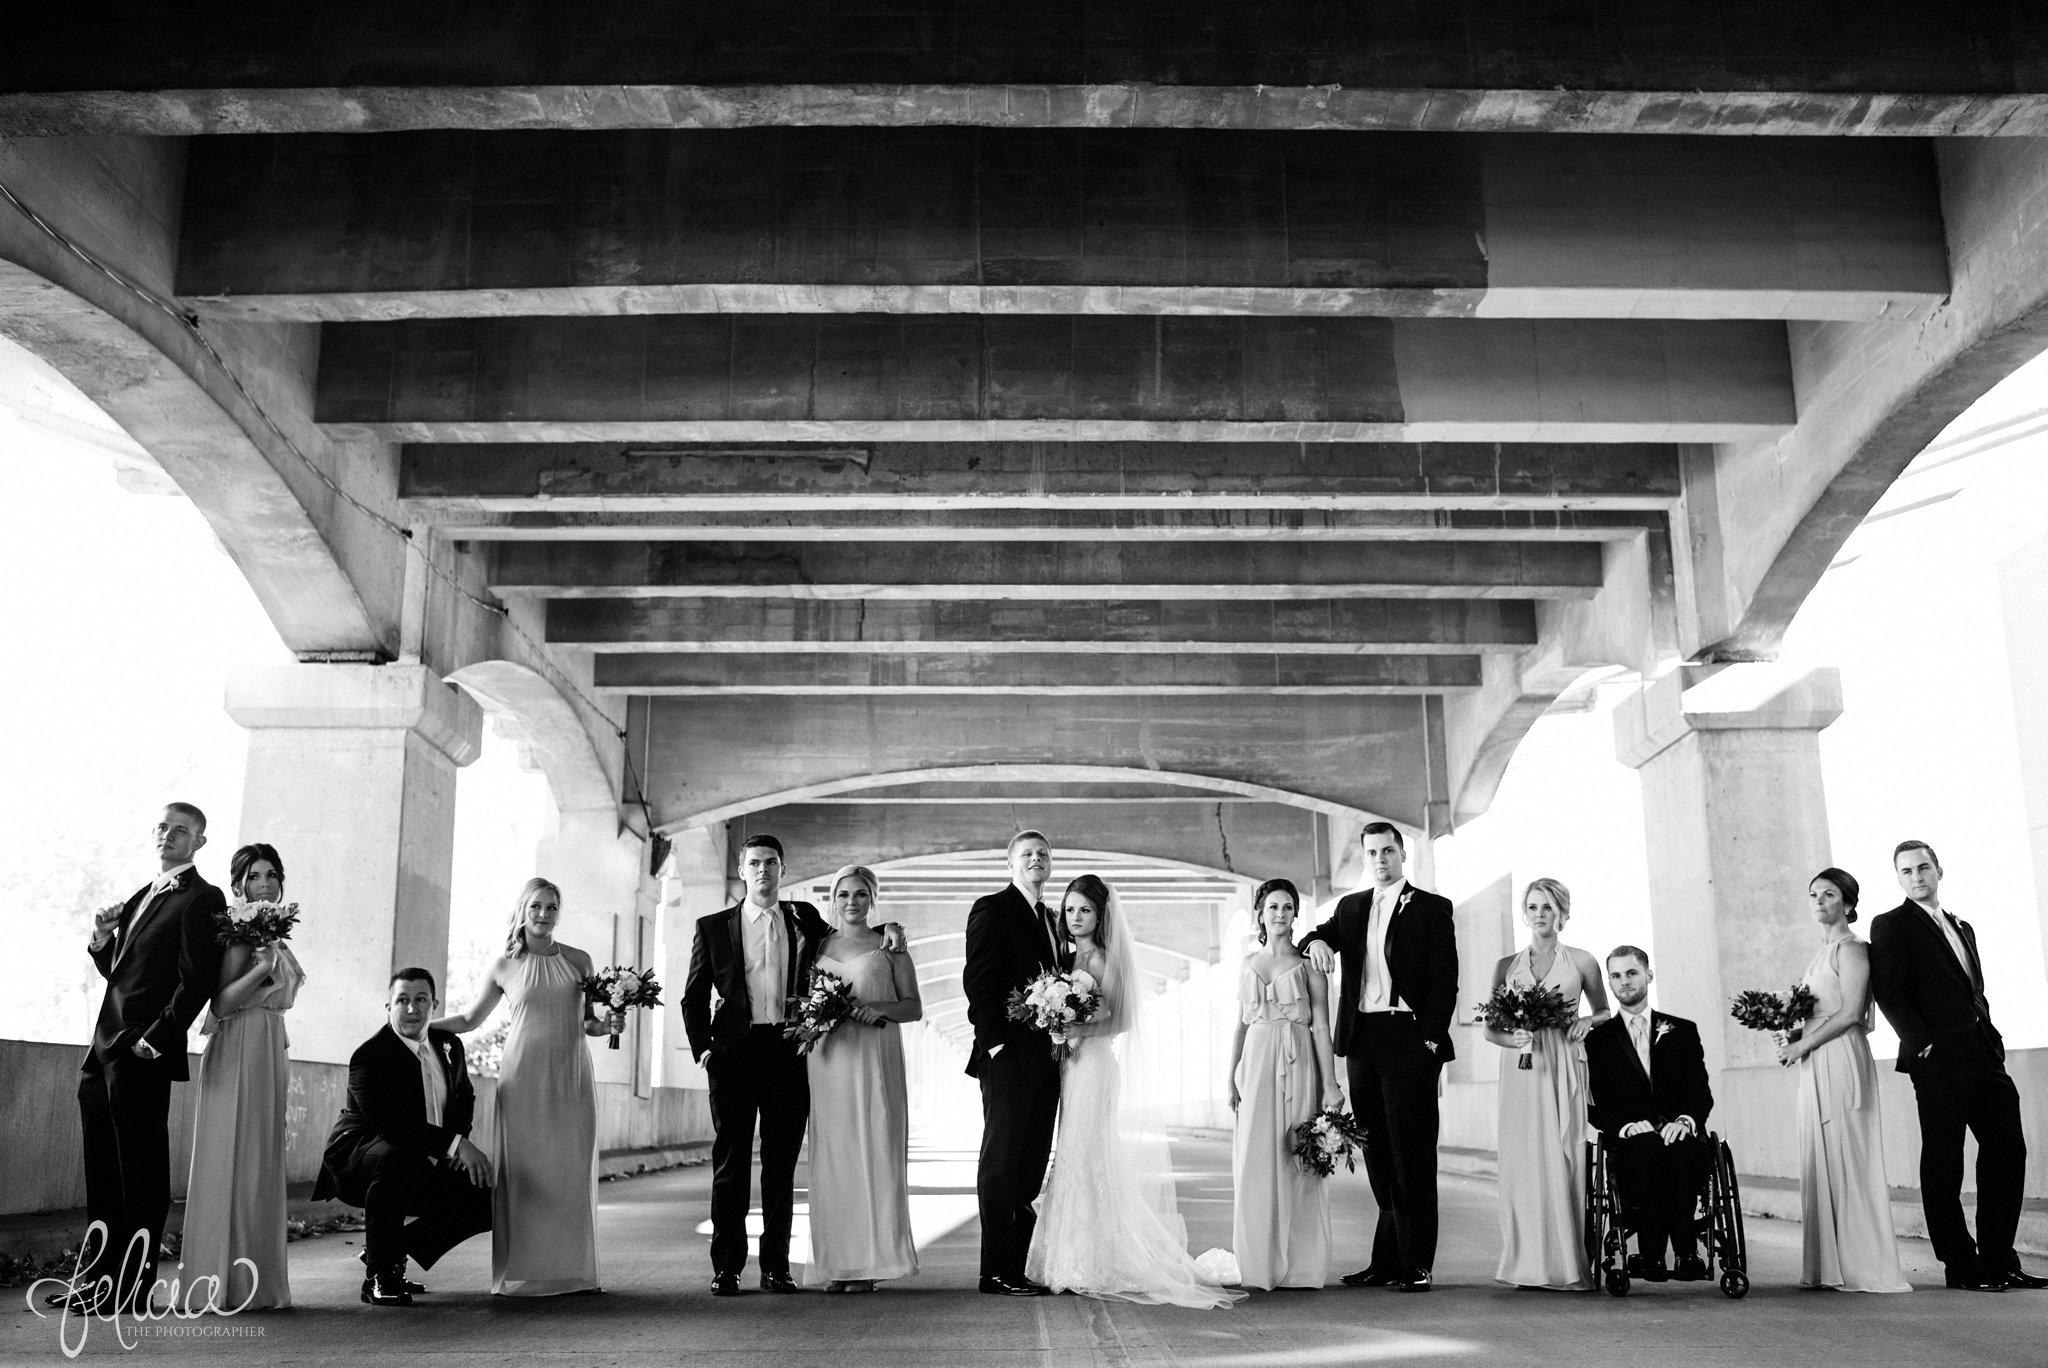 black and white | wedding | wedding photos | industrial | Rumely Event Space | wedding photography | images by feliciathephotographer.com | West Bottoms | industrial background | bridal party | unique poses 